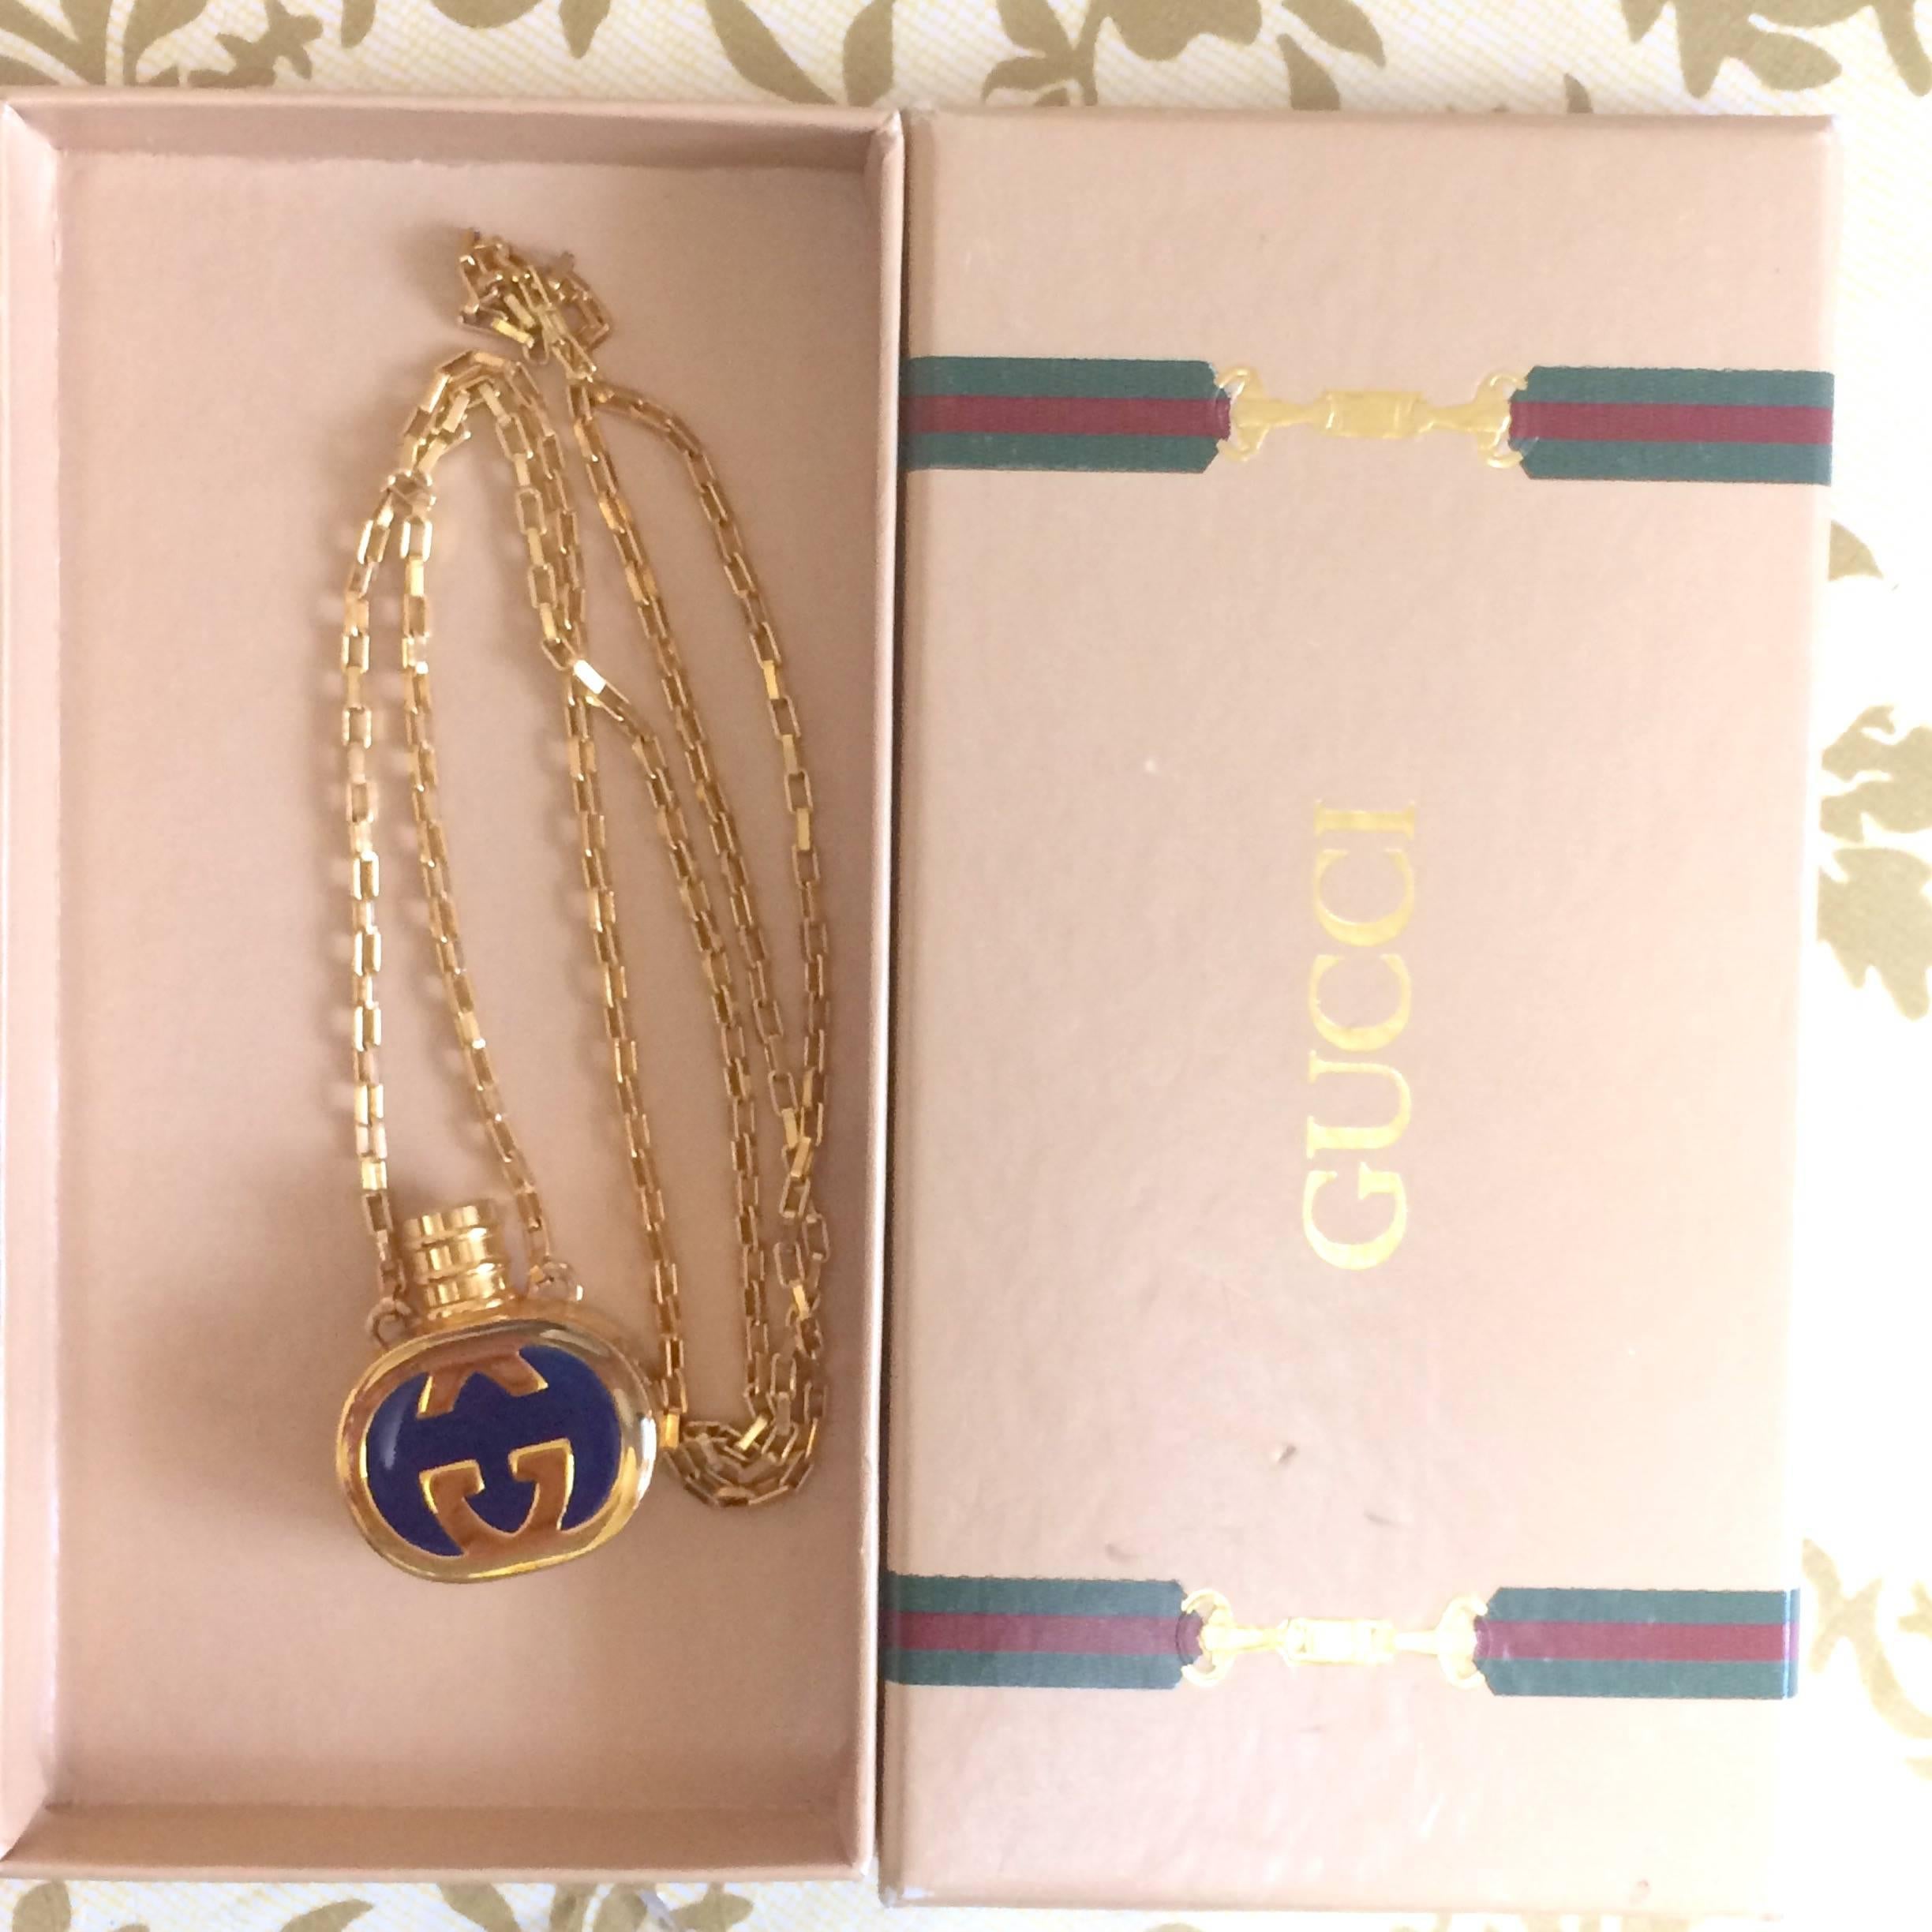 Vintage Gucci gold and navy round shape perfume bottle necklace with logo mark. 2